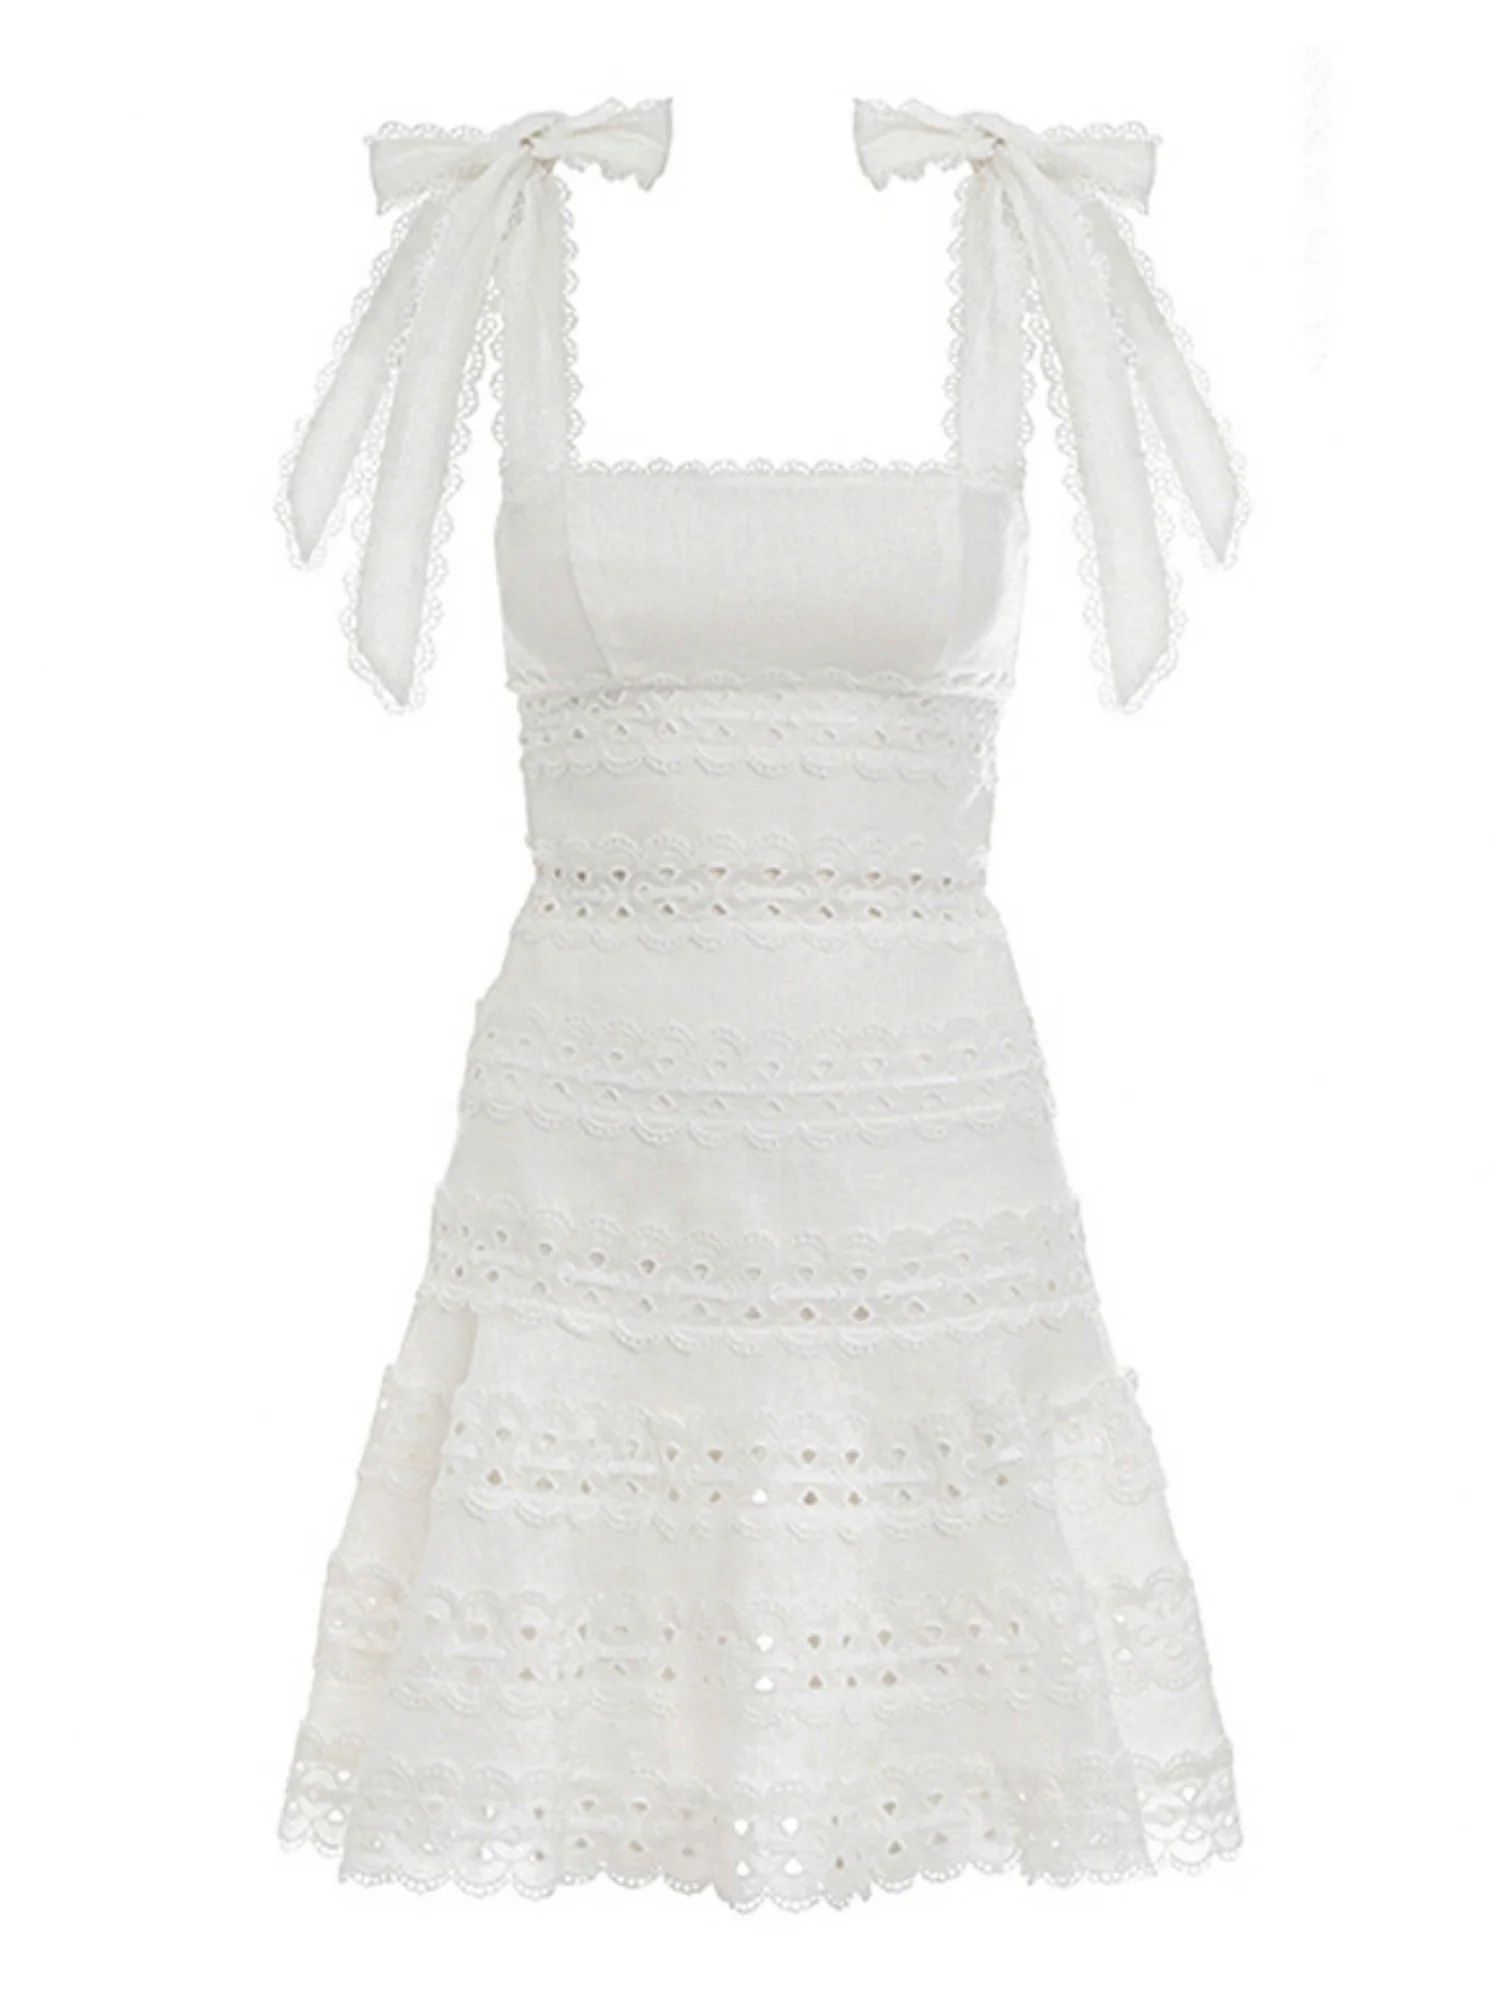 'Dolly' Crochet Tied Straps Dress (3 Colors) | Goodnight Macaroon